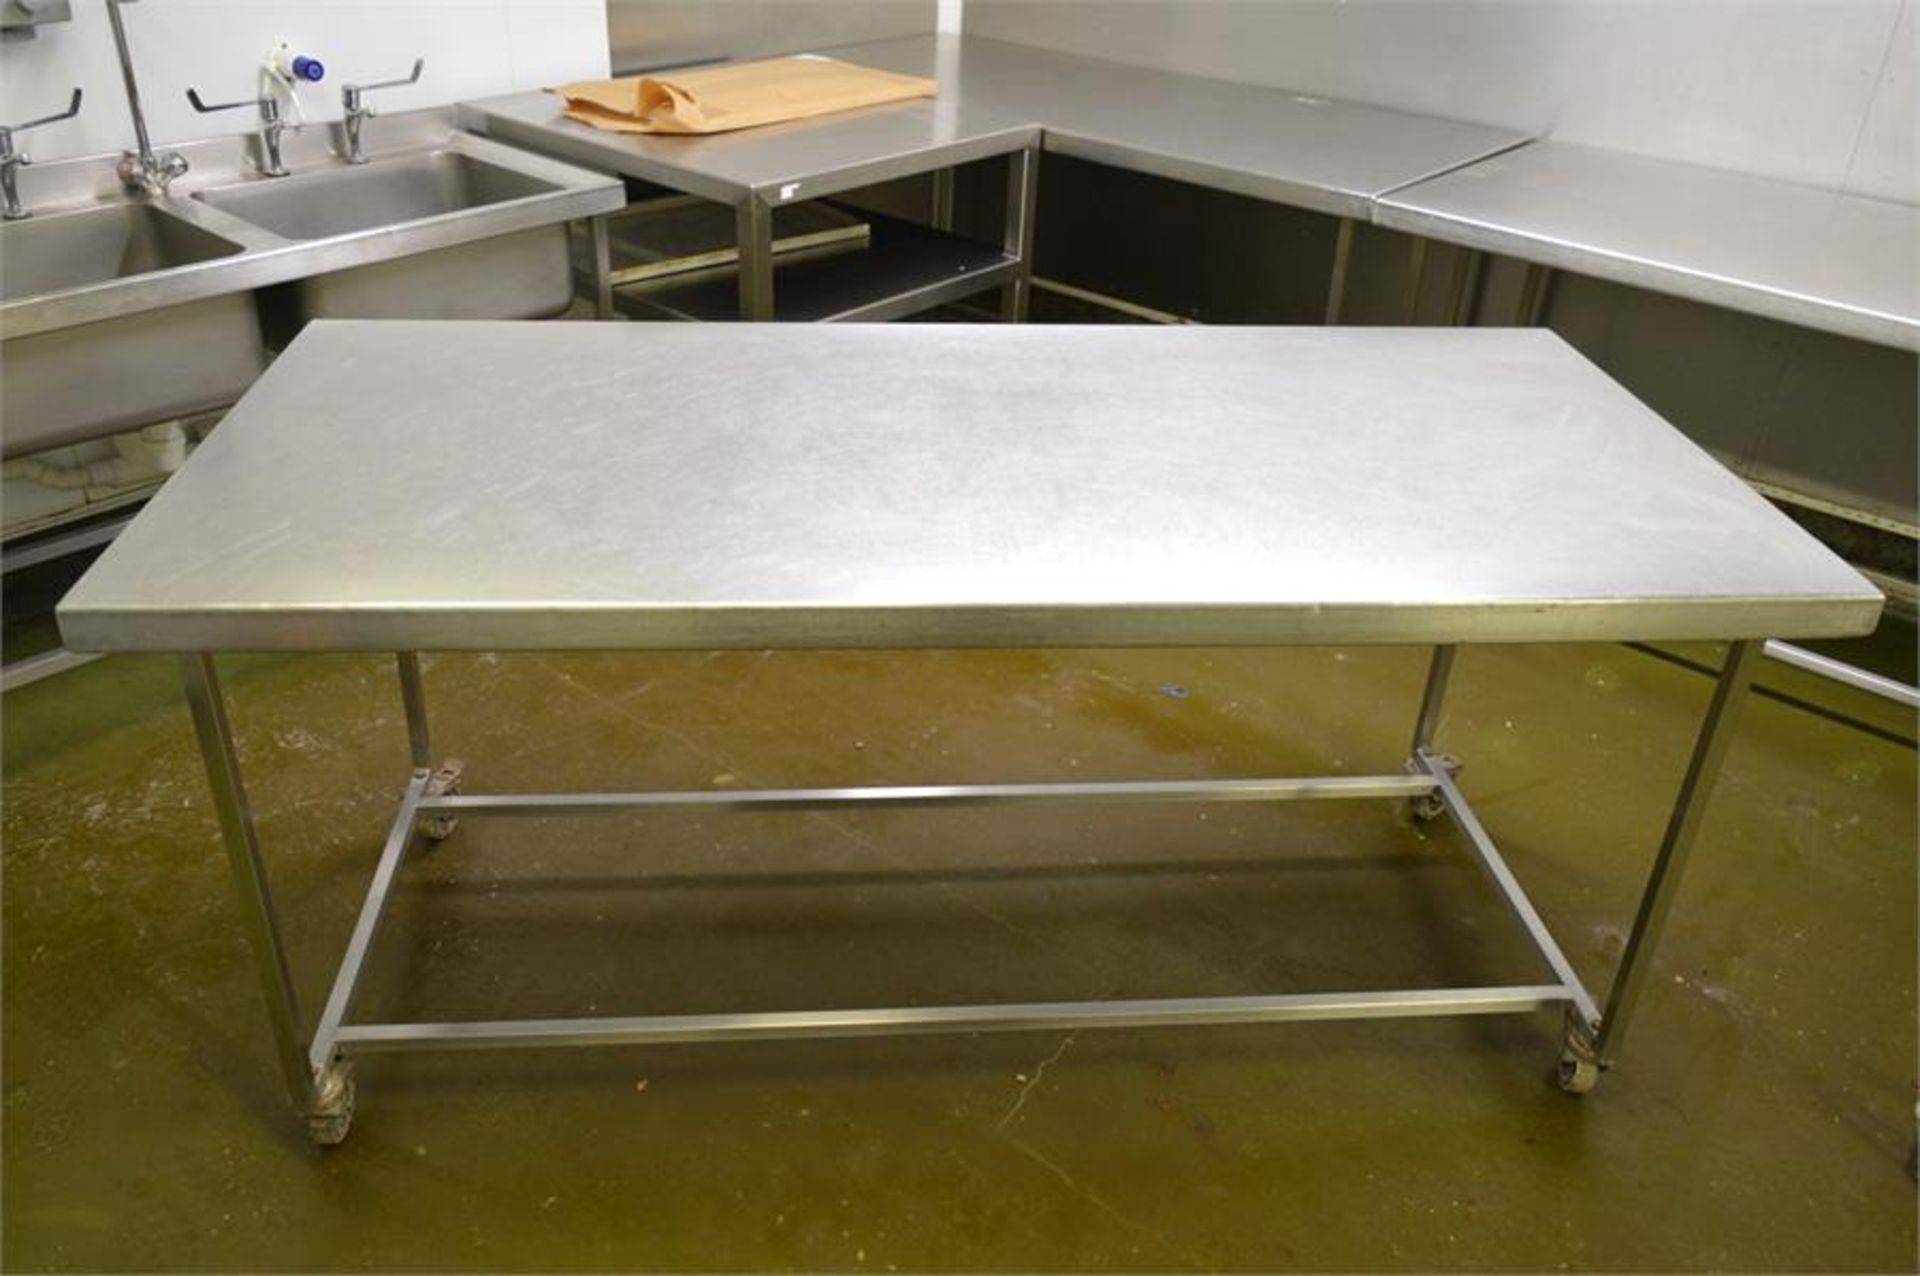 Stainless steel mobile prep table, 1.87m (w) x 0.87m (d) x 0.88m (h) with tin opener (Located at